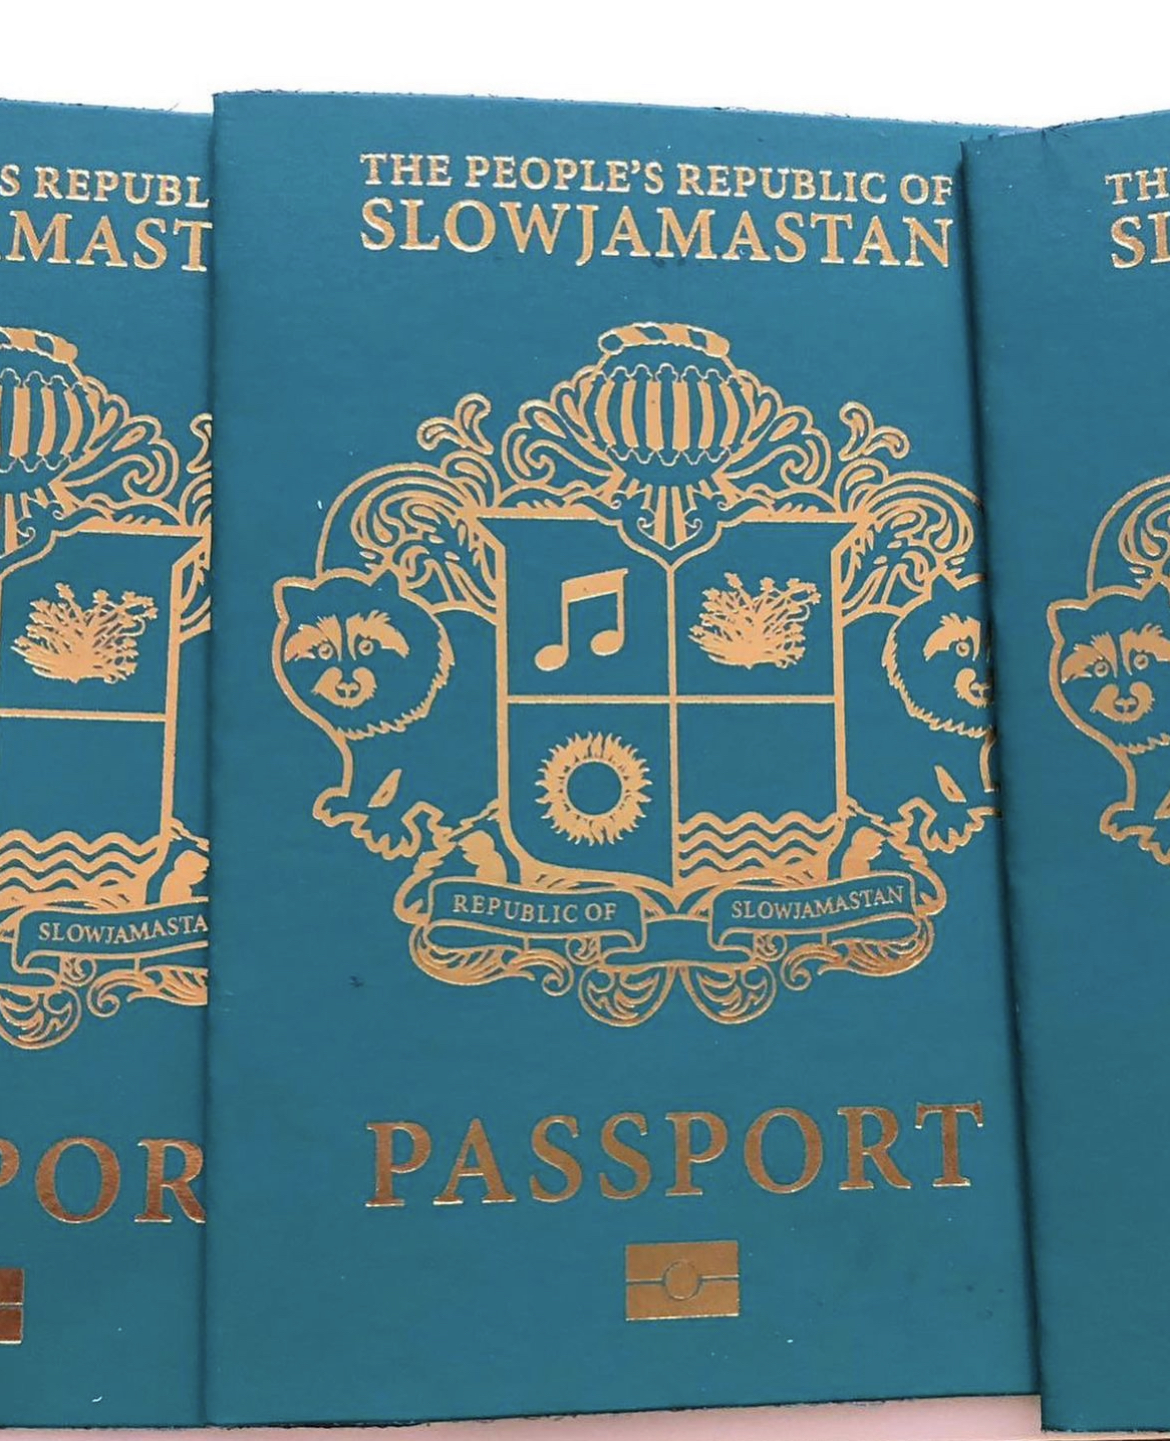 Image of a Slowjamastan passport, showcasing the distinctive design and identity of this micronation's travel document.